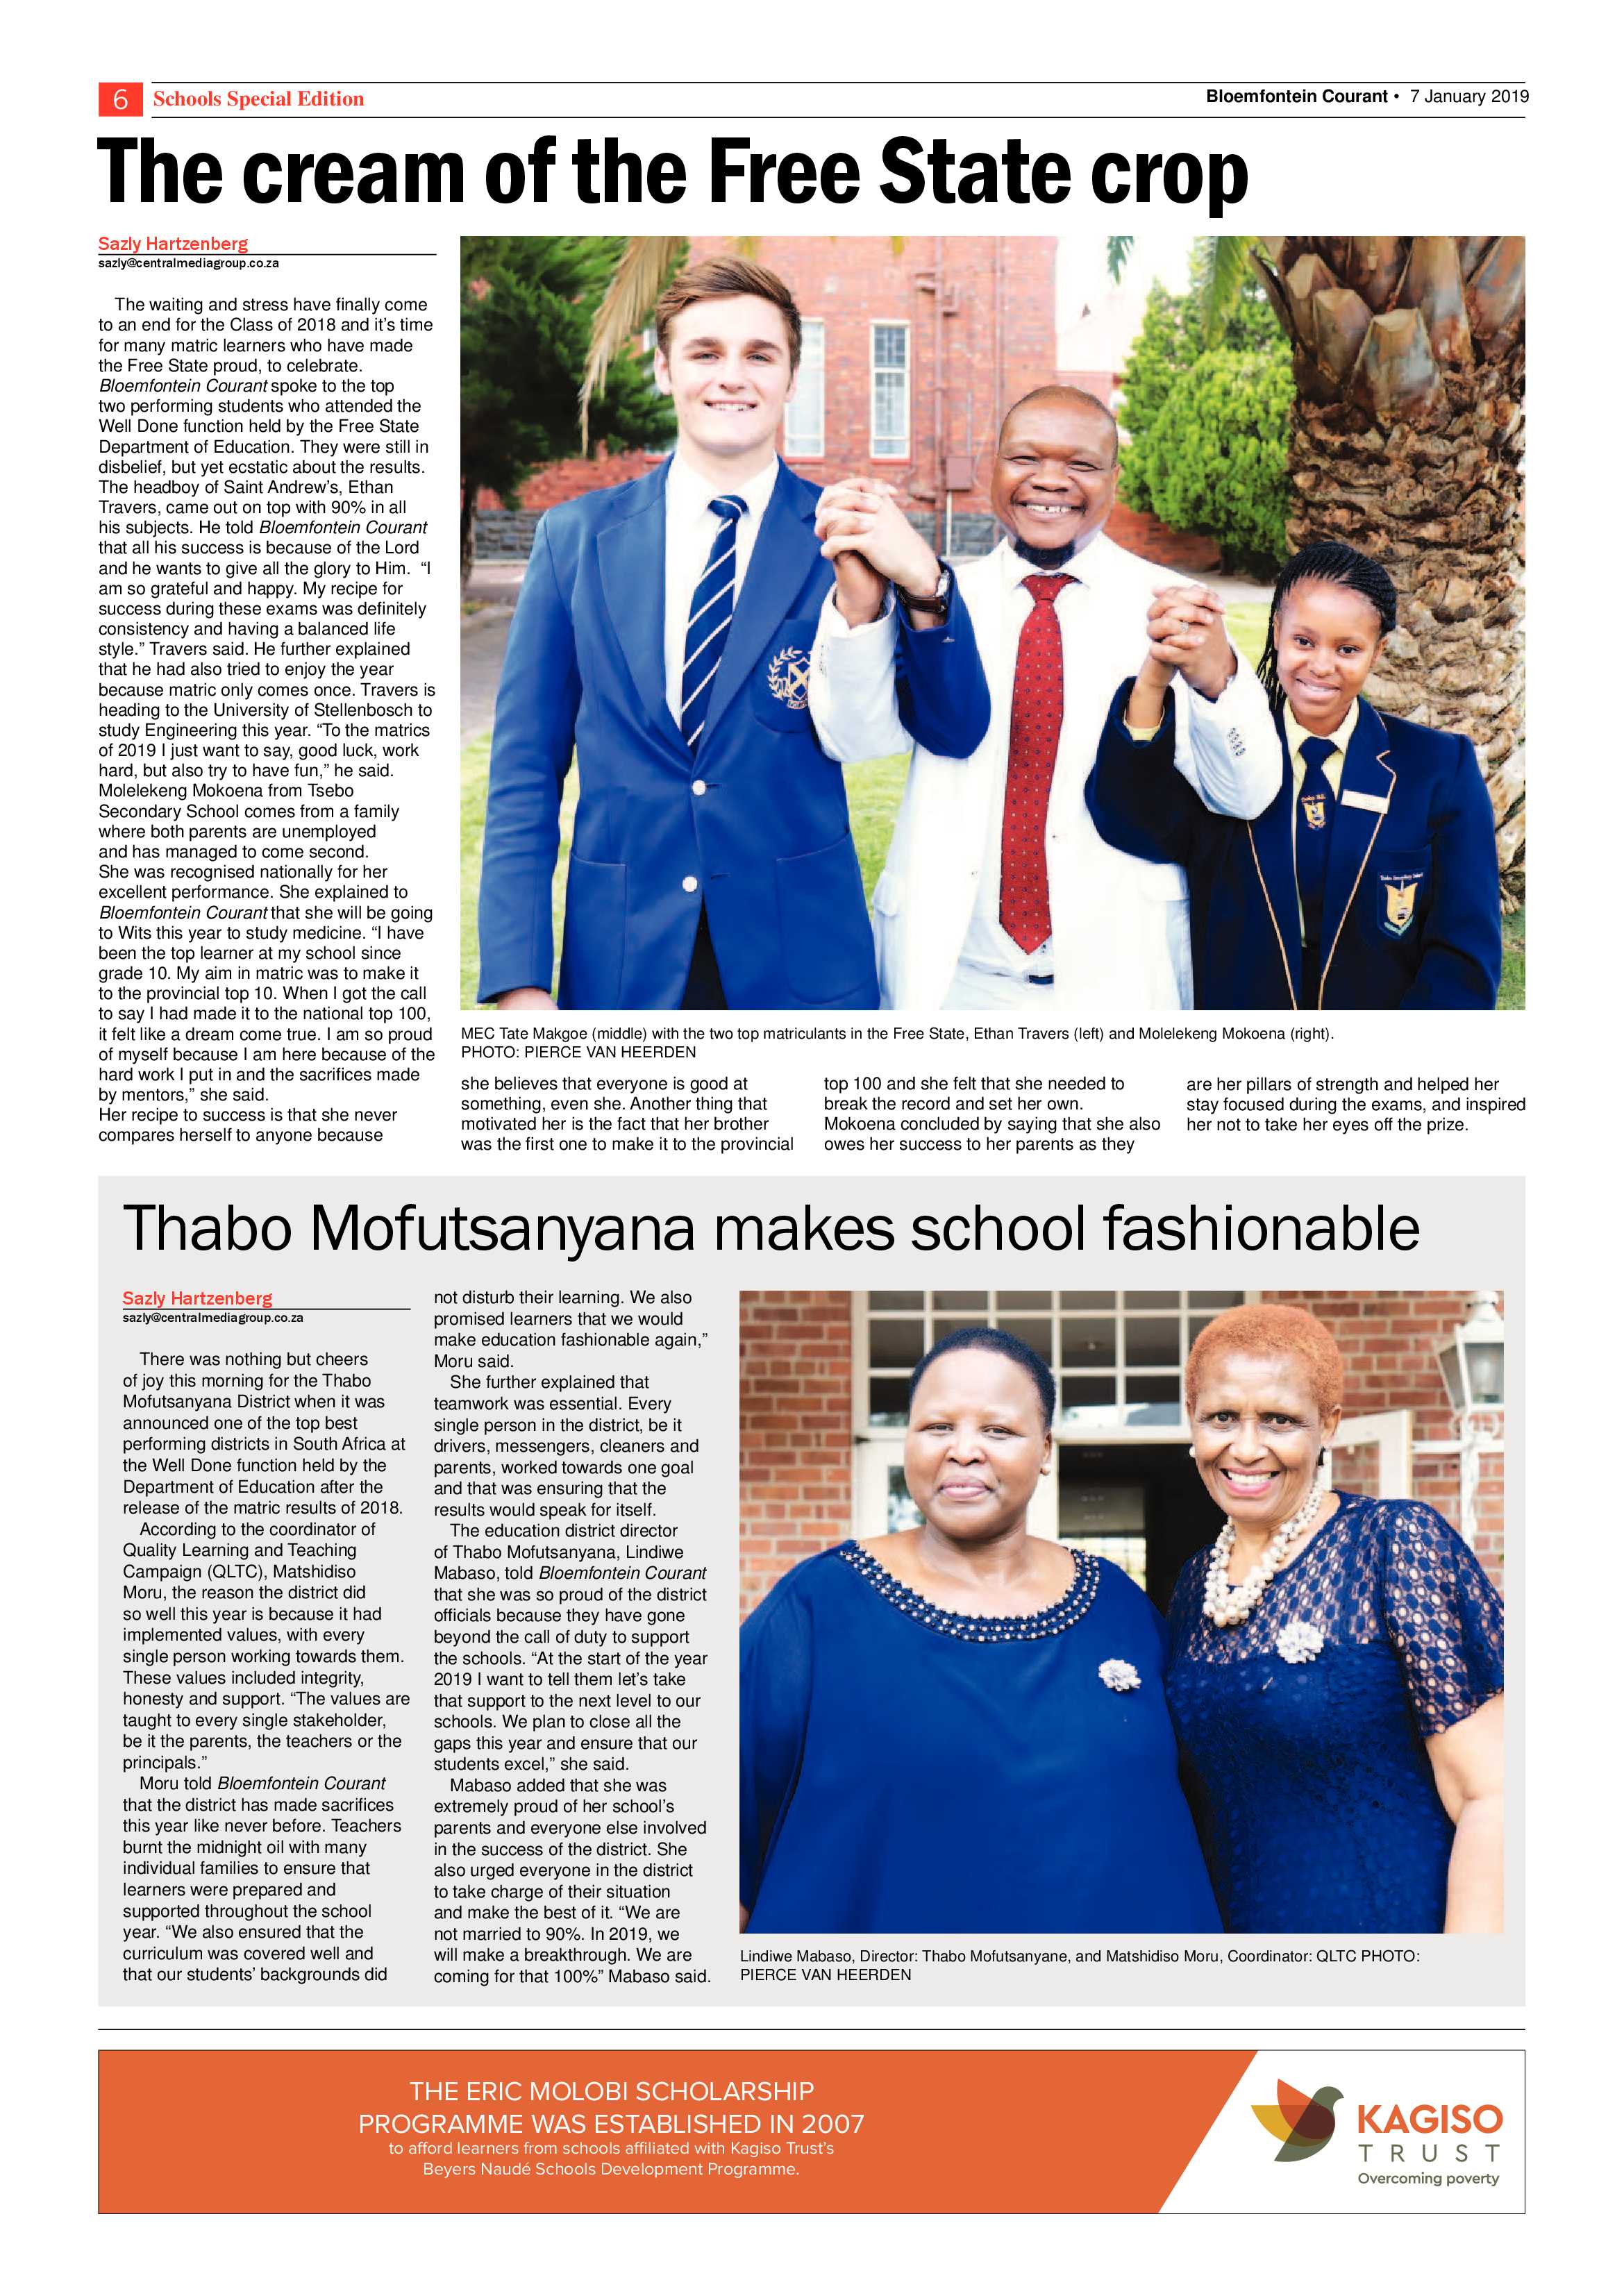 courant-school-edition-07-january-2019-epapers-page-6